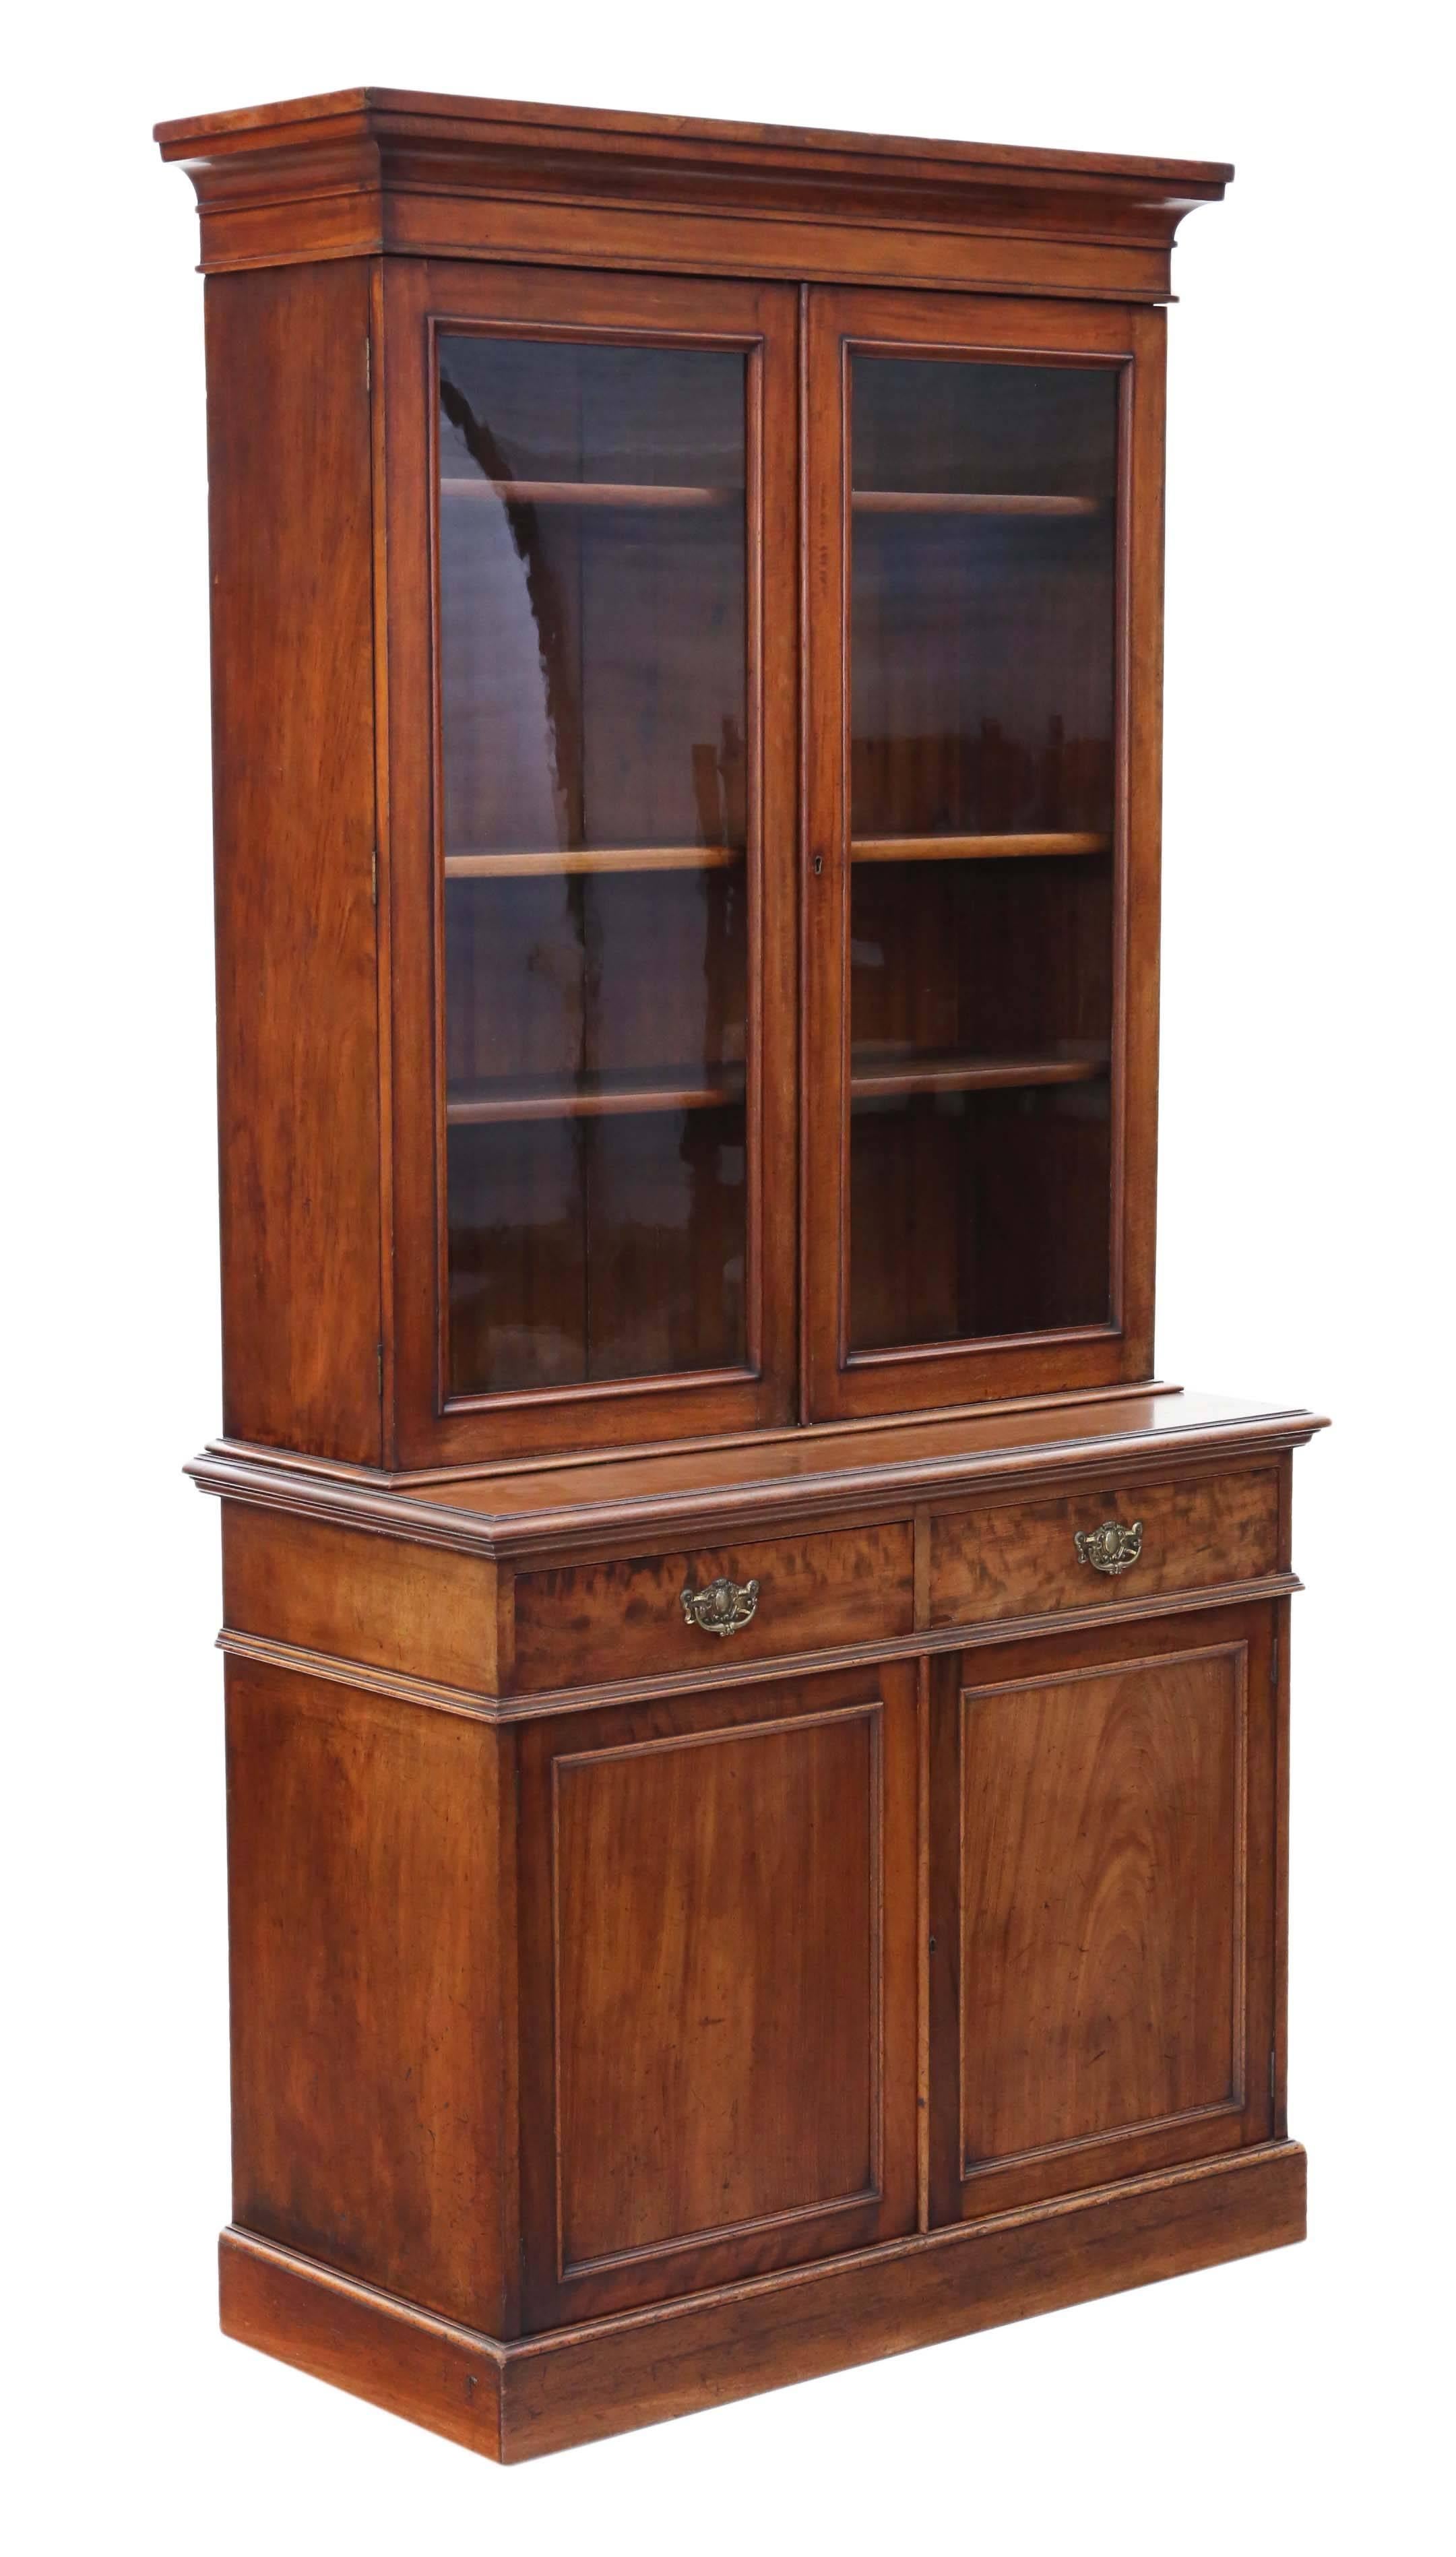 Antique tall Victorian mahogany glazed bookcase cupboard display cabinet.

Would make a great housekeeper's cupboard also. Please check the ceiling height to make sure that the piece will fit.

This is a lovely quality bookcase, that is full of